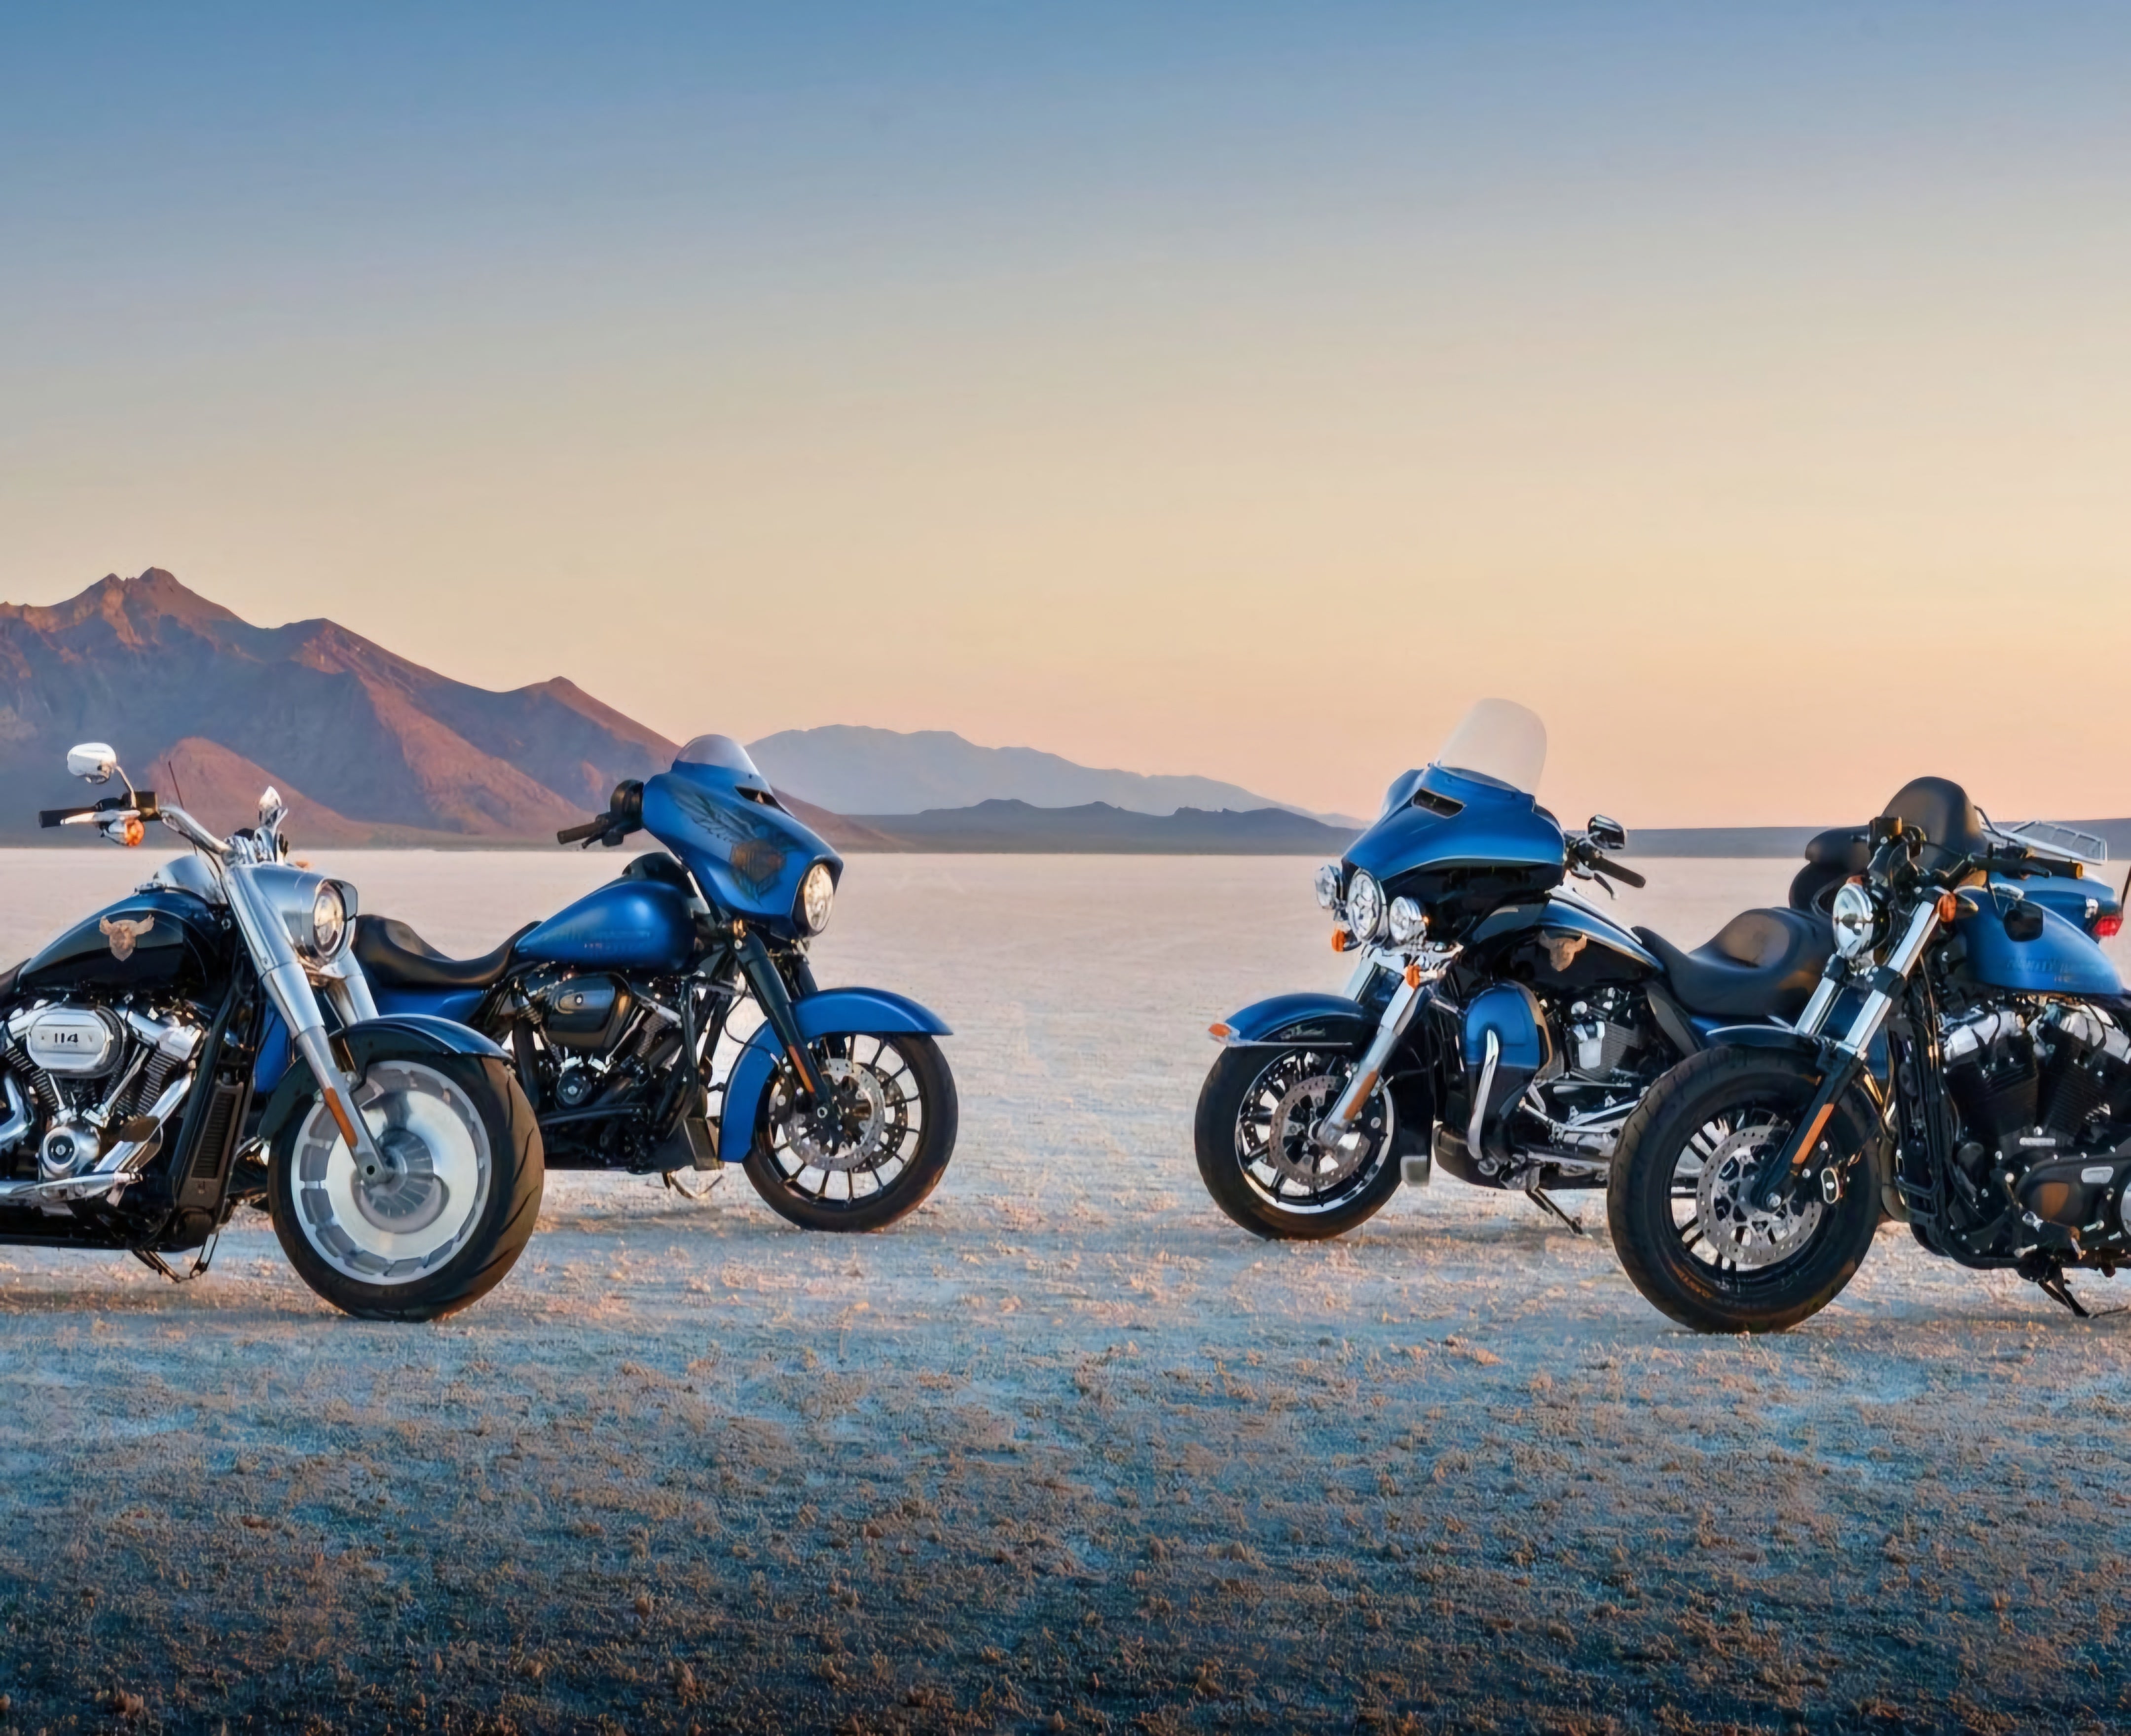 Buying a Used Motorcycle: 5 Things to Consider